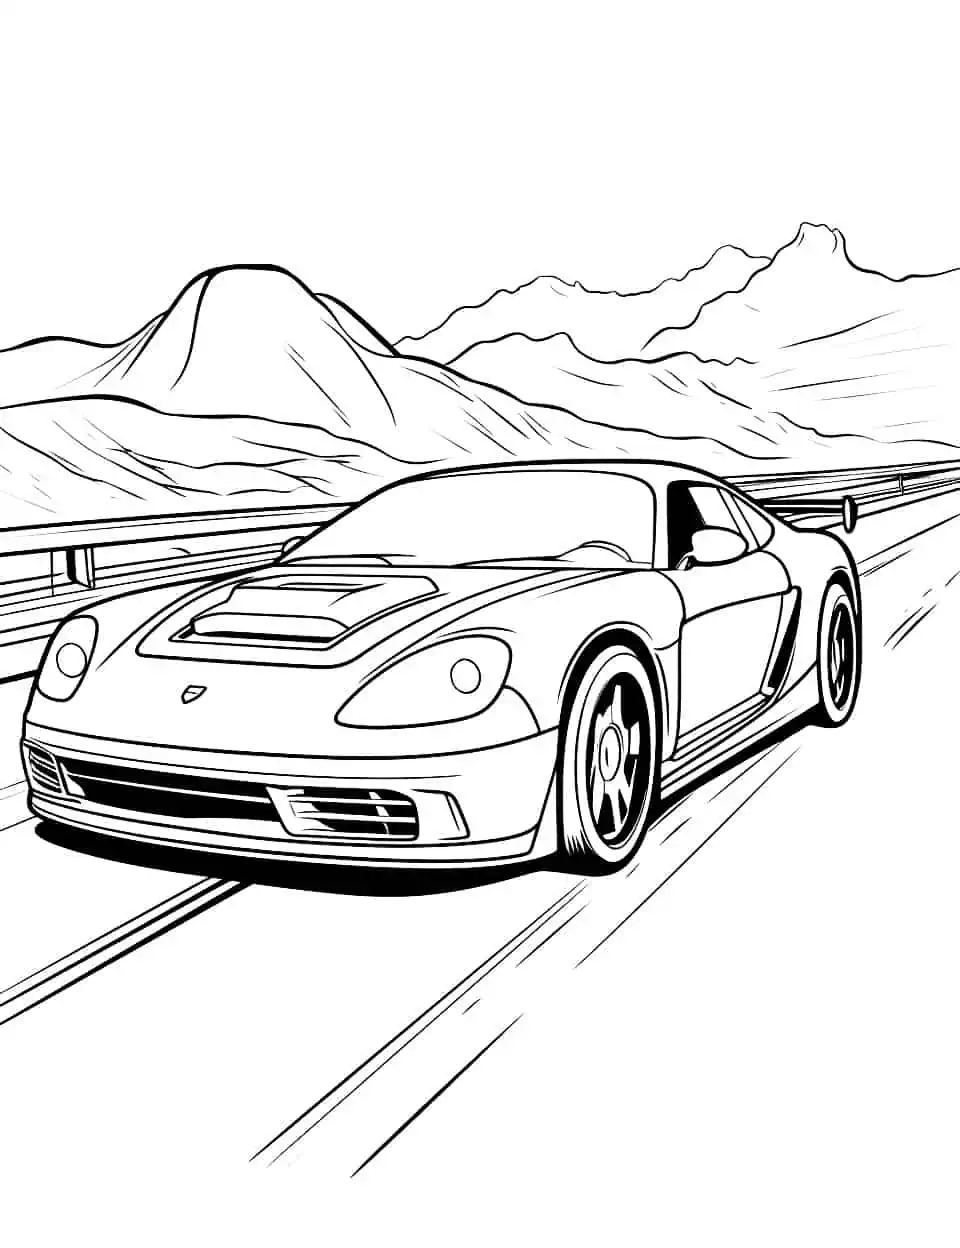 Fast Car Frenzy Coloring Page - A scene of a fast car speeding on a freeway.